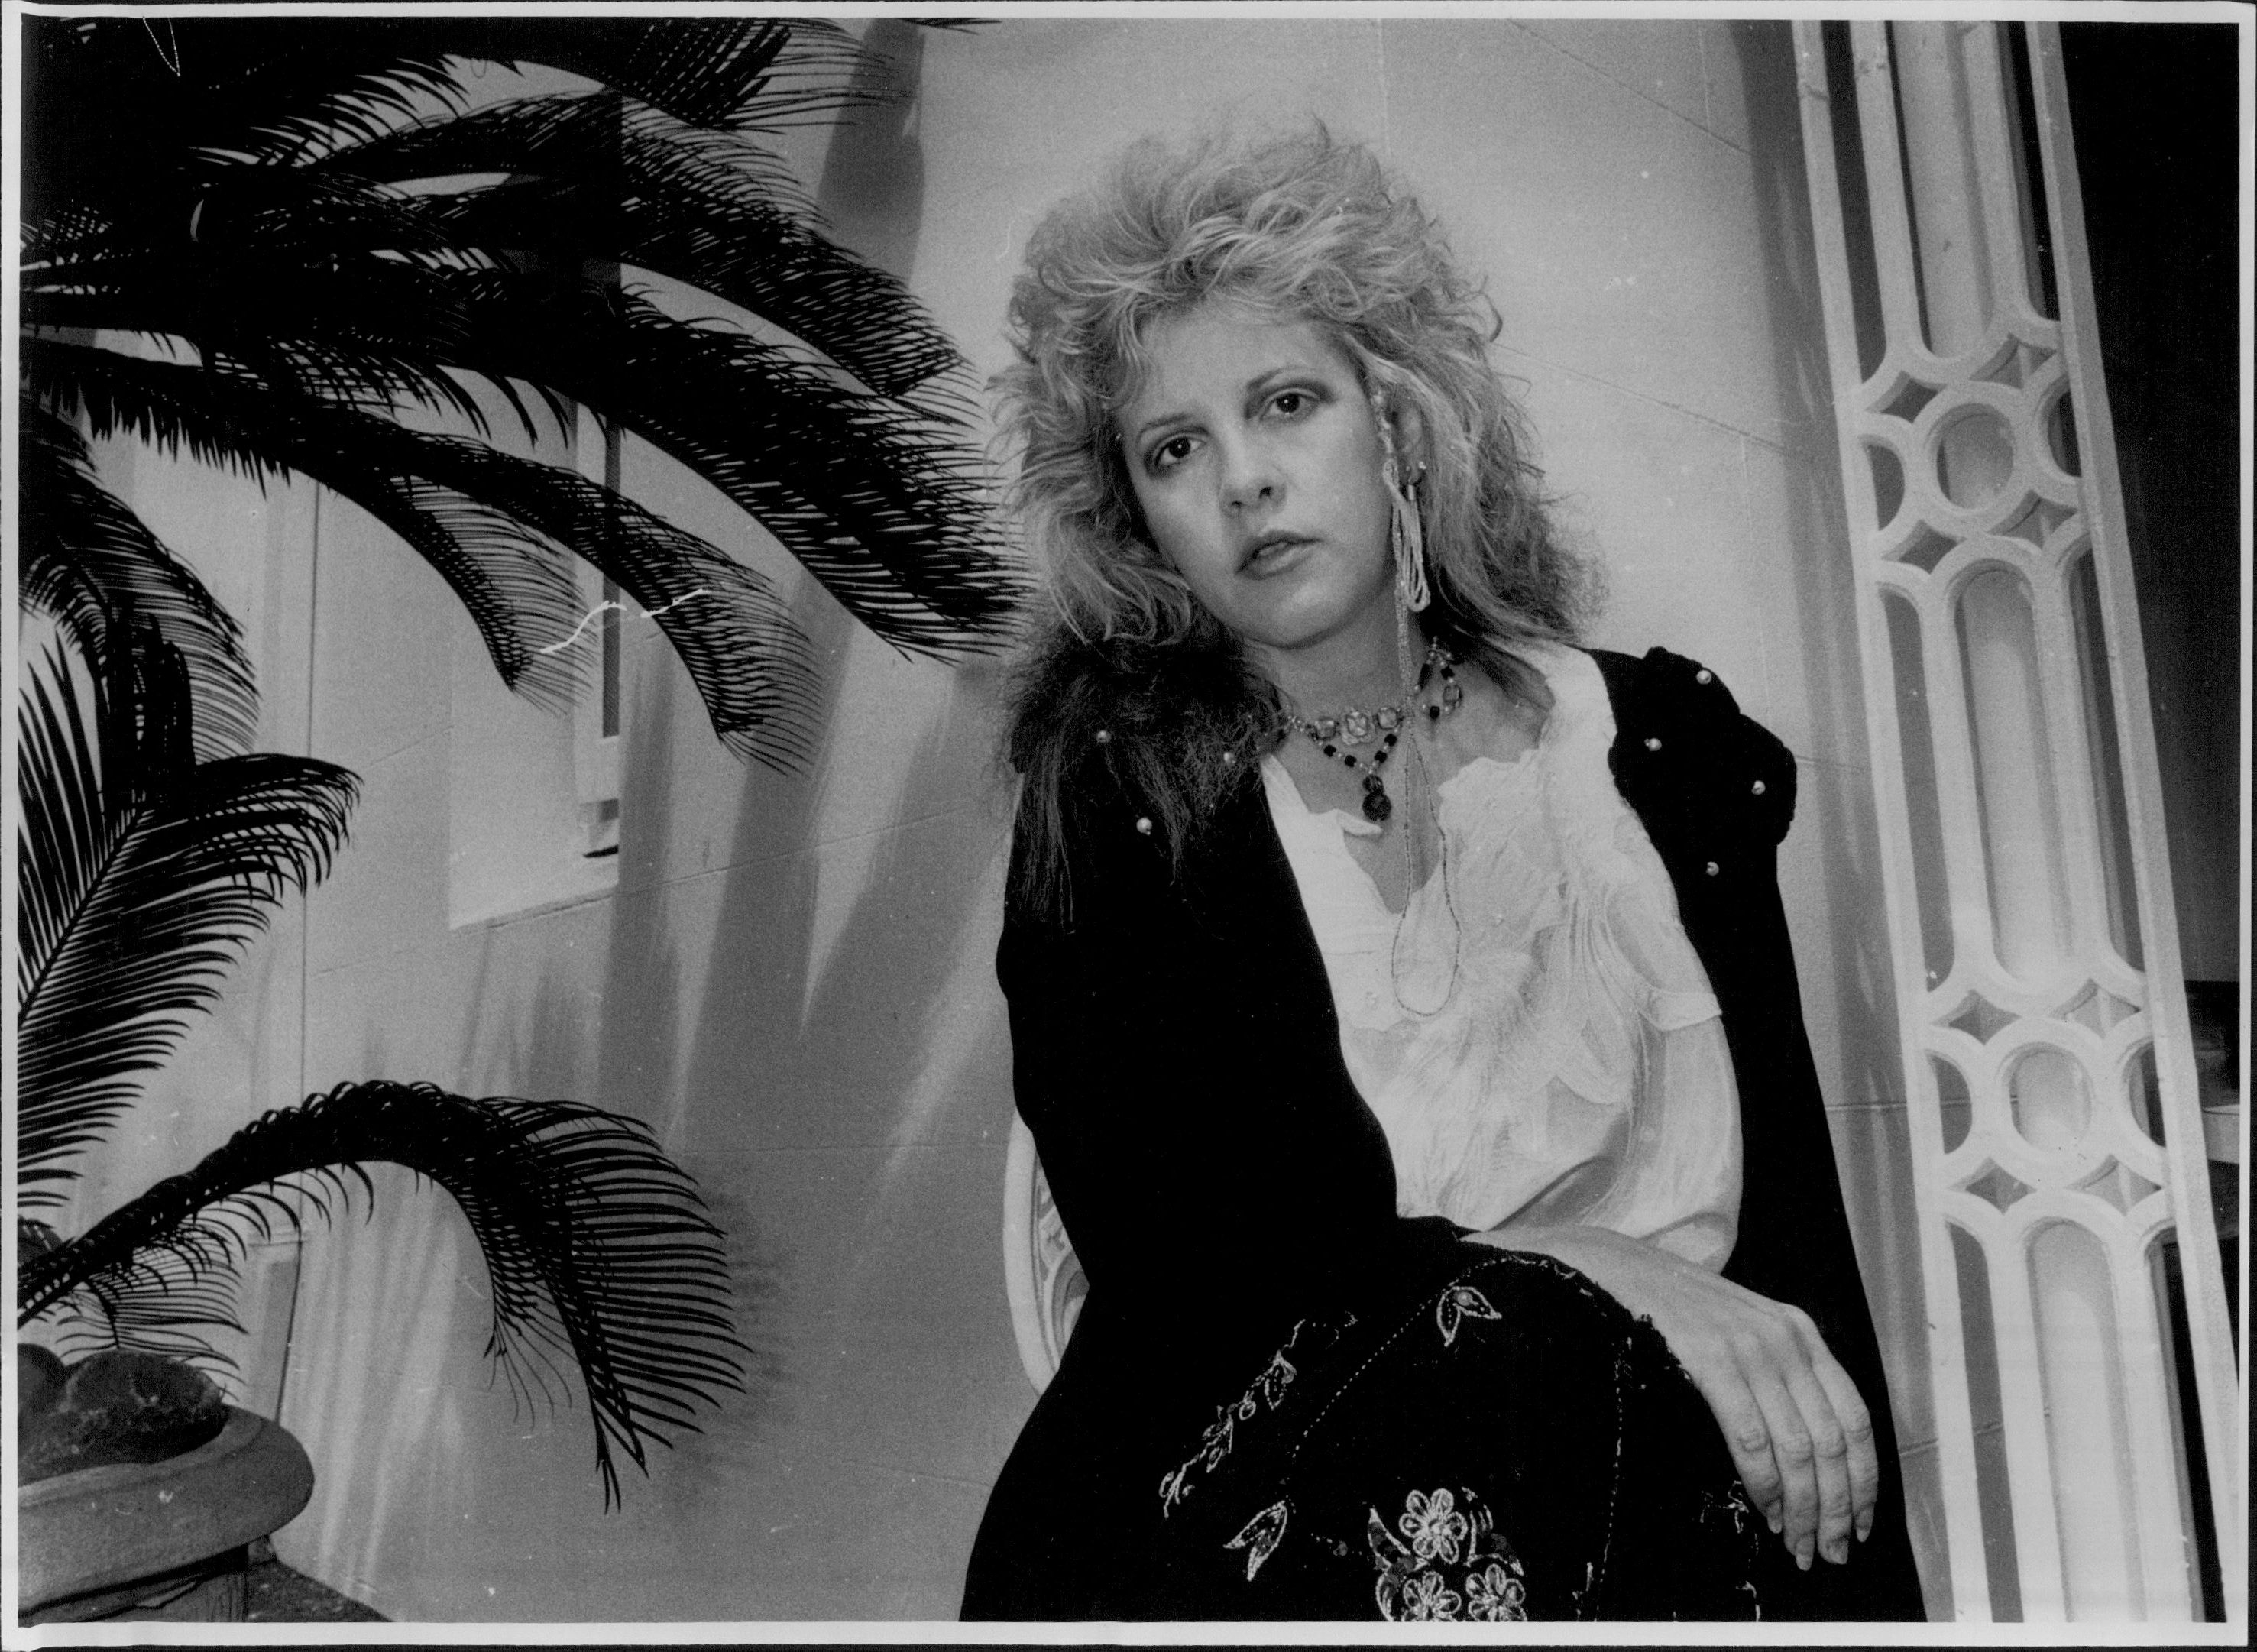 A black and white picture of Stevie Nicks sitting near a potted palm plant in 1986, the same year she went to rehab.